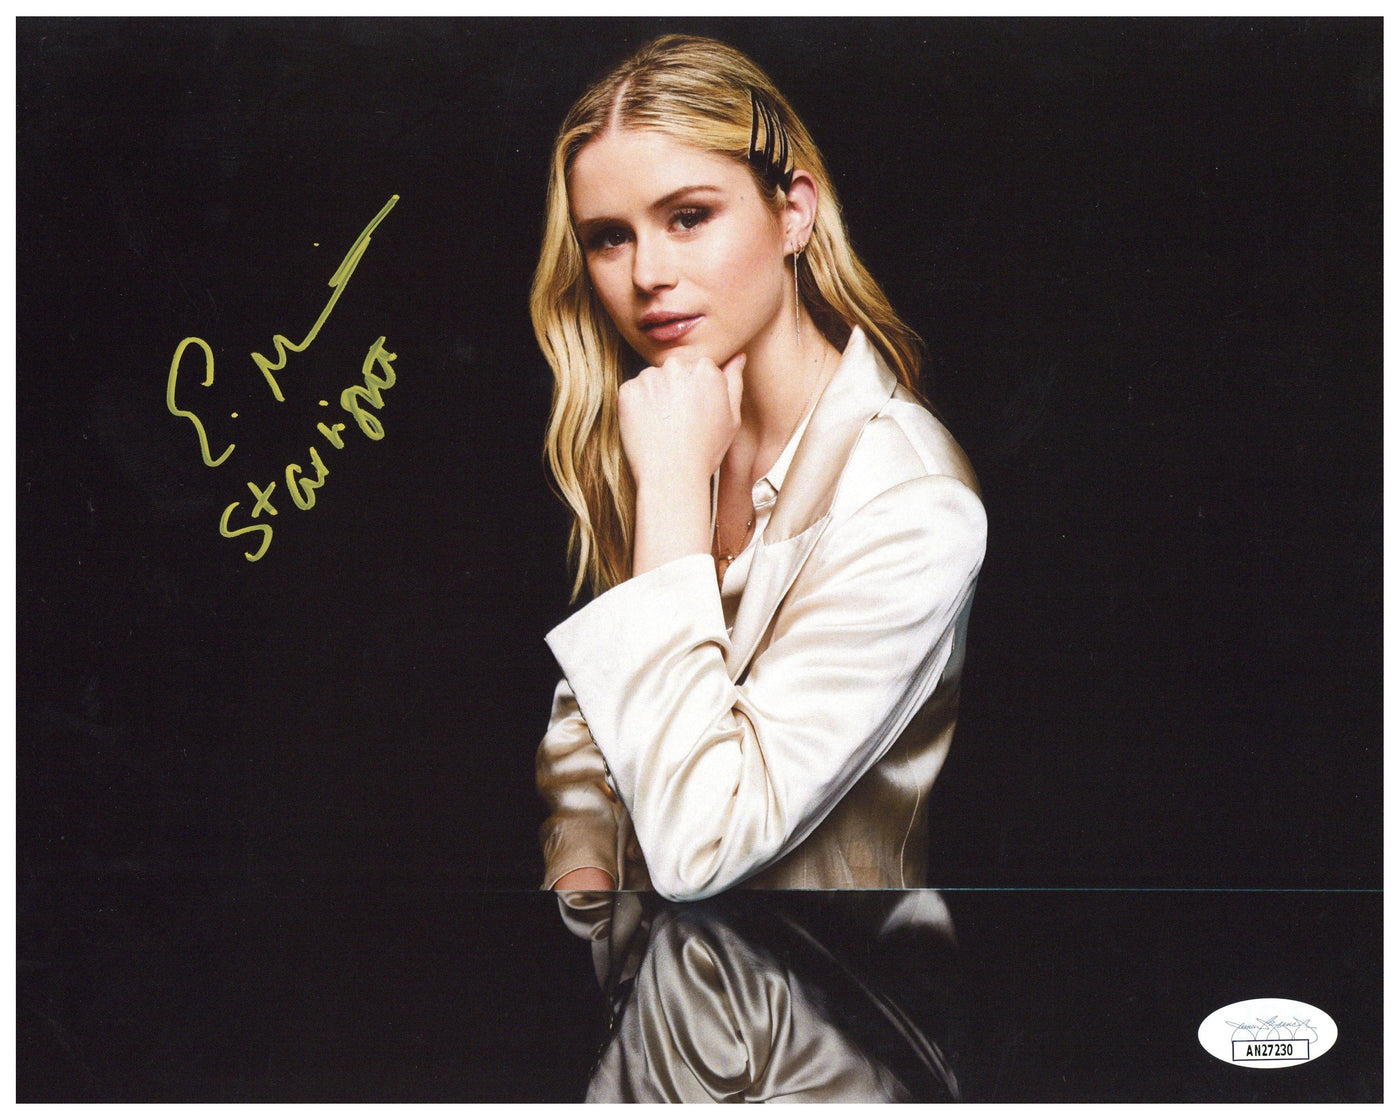 Erin Moriarty Signed 8x10 Photo Amazon The Boys Authentic Autographed JSA COA